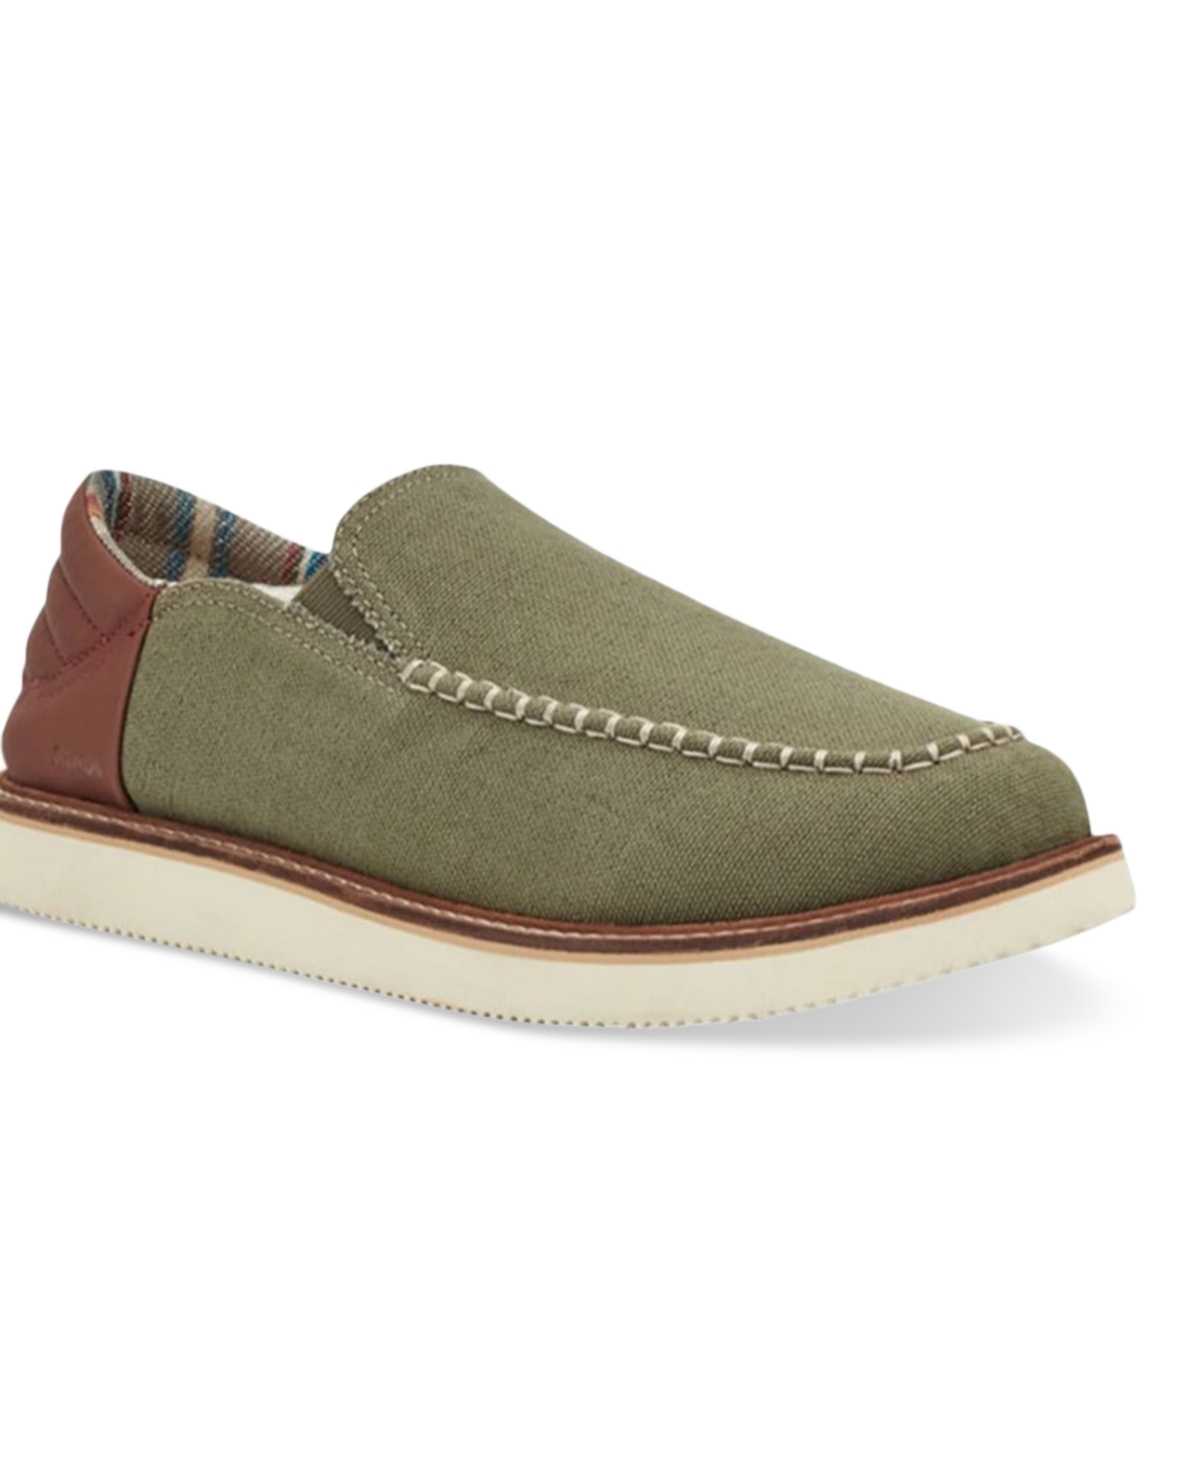 Men's Cozy Vibe Low Sm Collapsible Heel Slippers - Stone Green